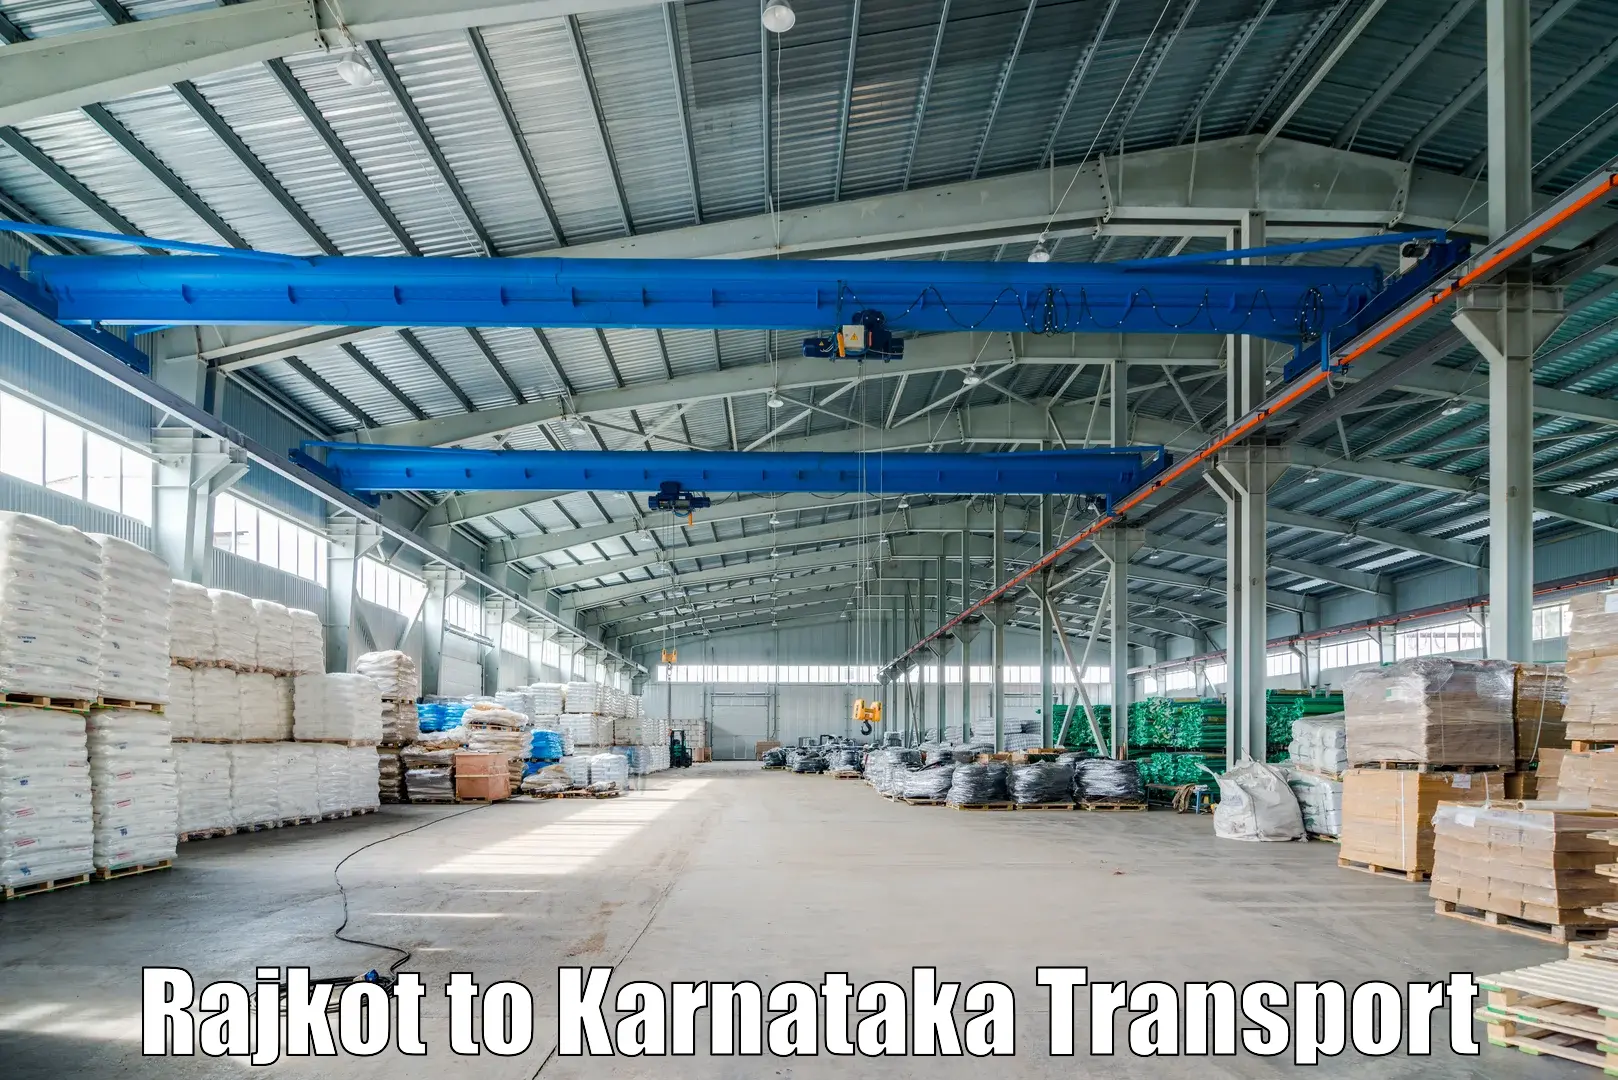 Truck transport companies in India Rajkot to Athani